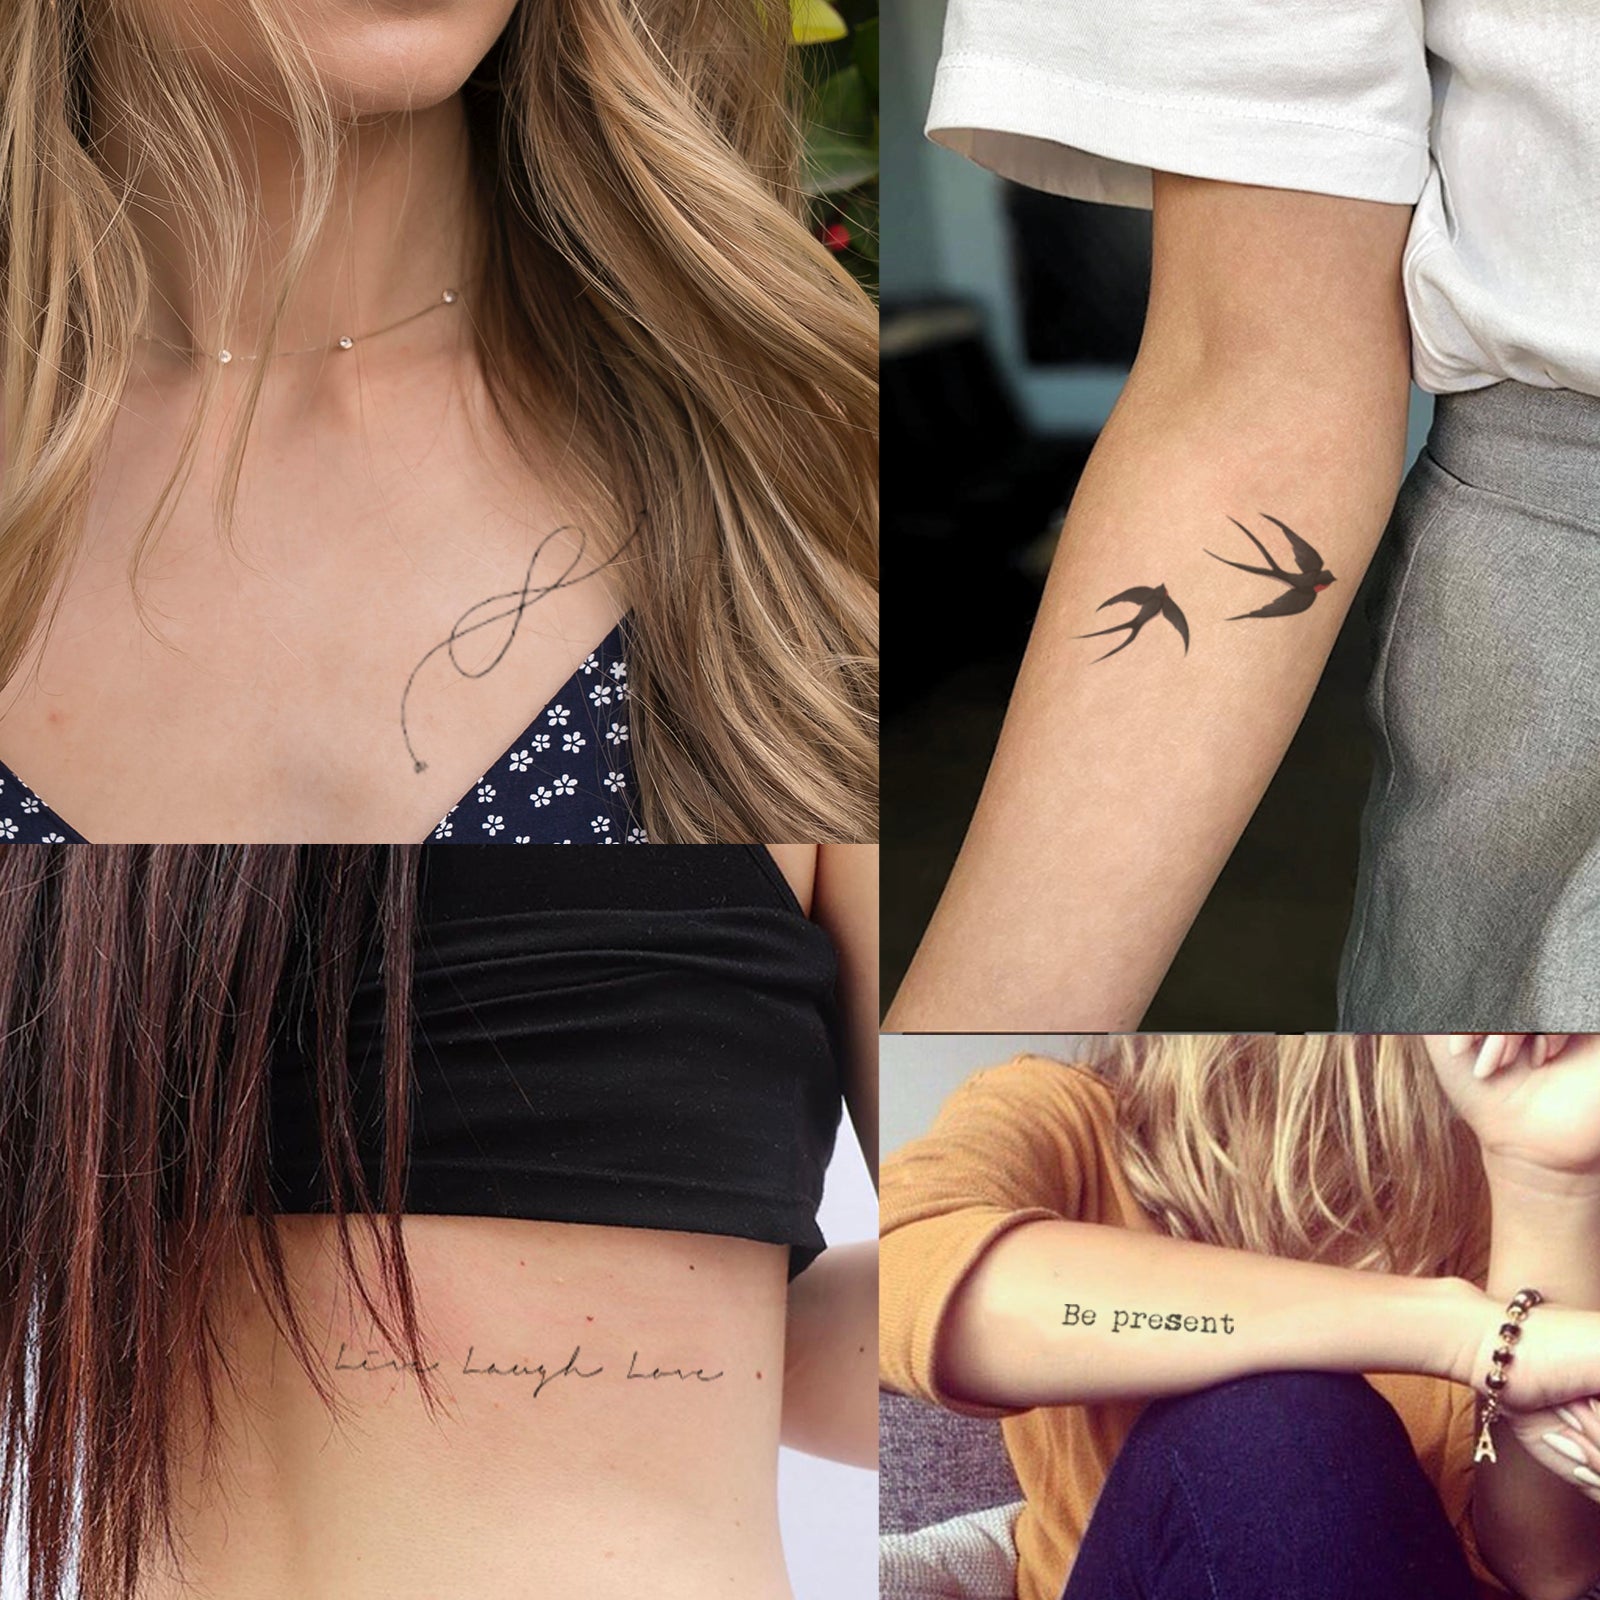 Buy Tiny Tattoos: 1,000+ Ideas and Inspirations: | 1,000 Designs |  Temporary Tattoos | Permanent Tattoos | Henna | Tattoo Meanings | Symbolism  Book Online at Low Prices in India | Tiny